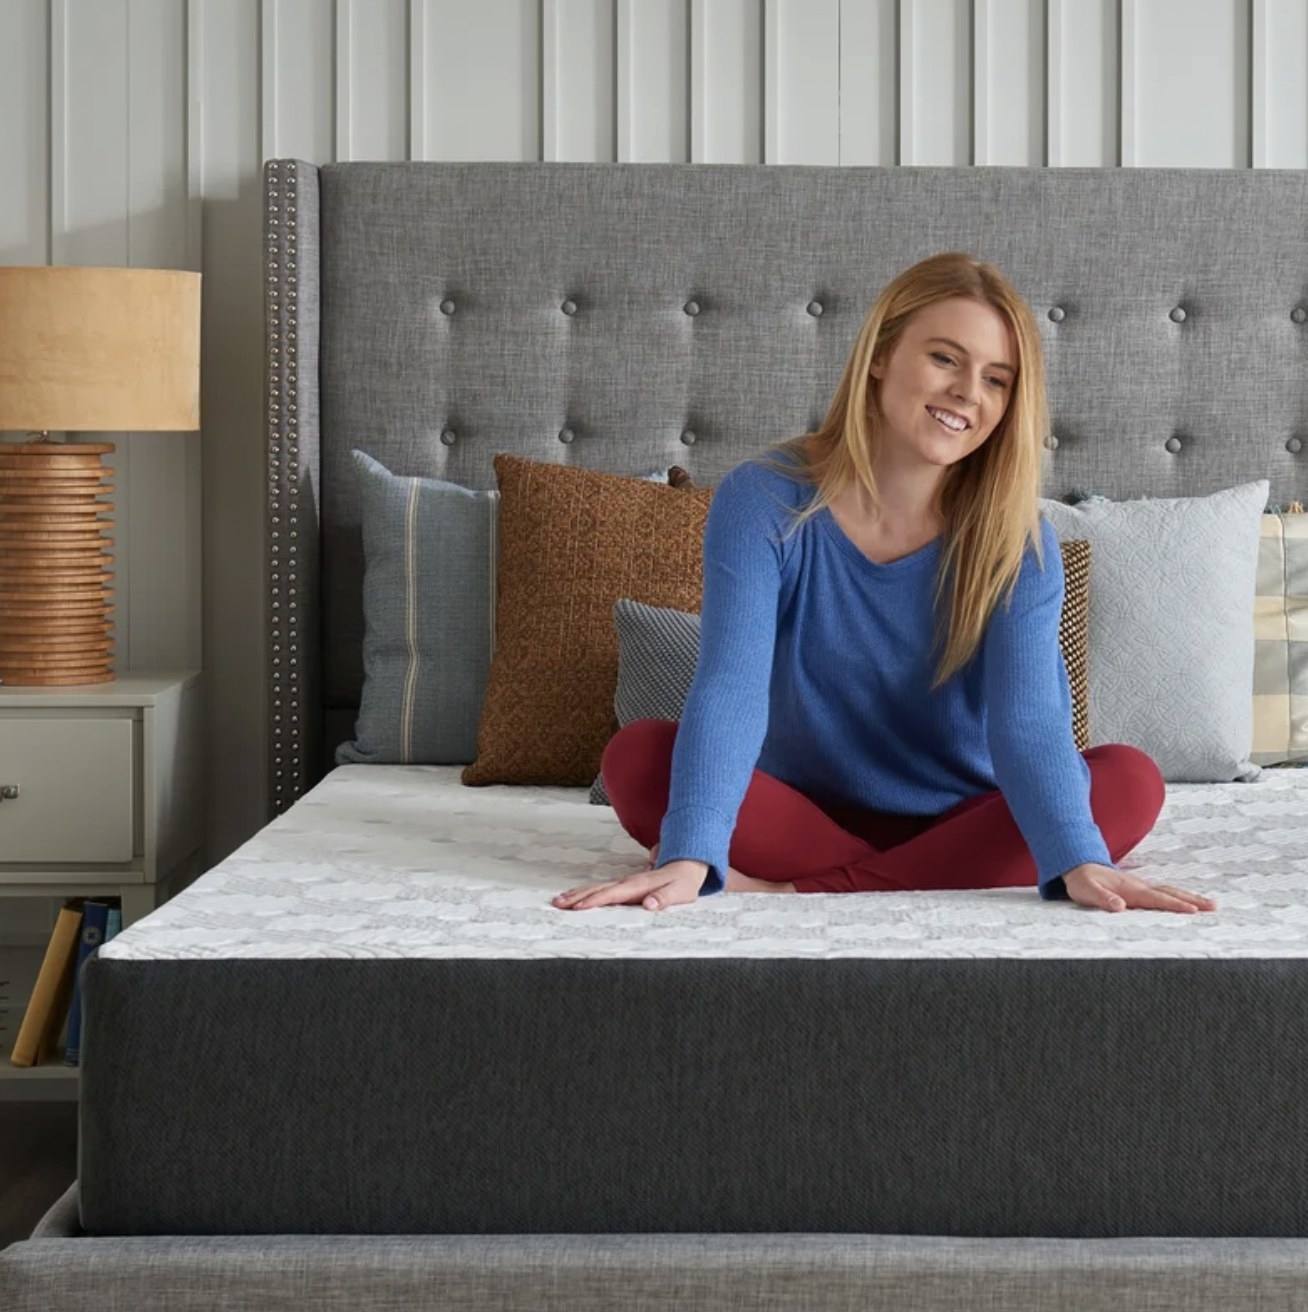 Model sitting on memory foam mattress and pressing palms into surface